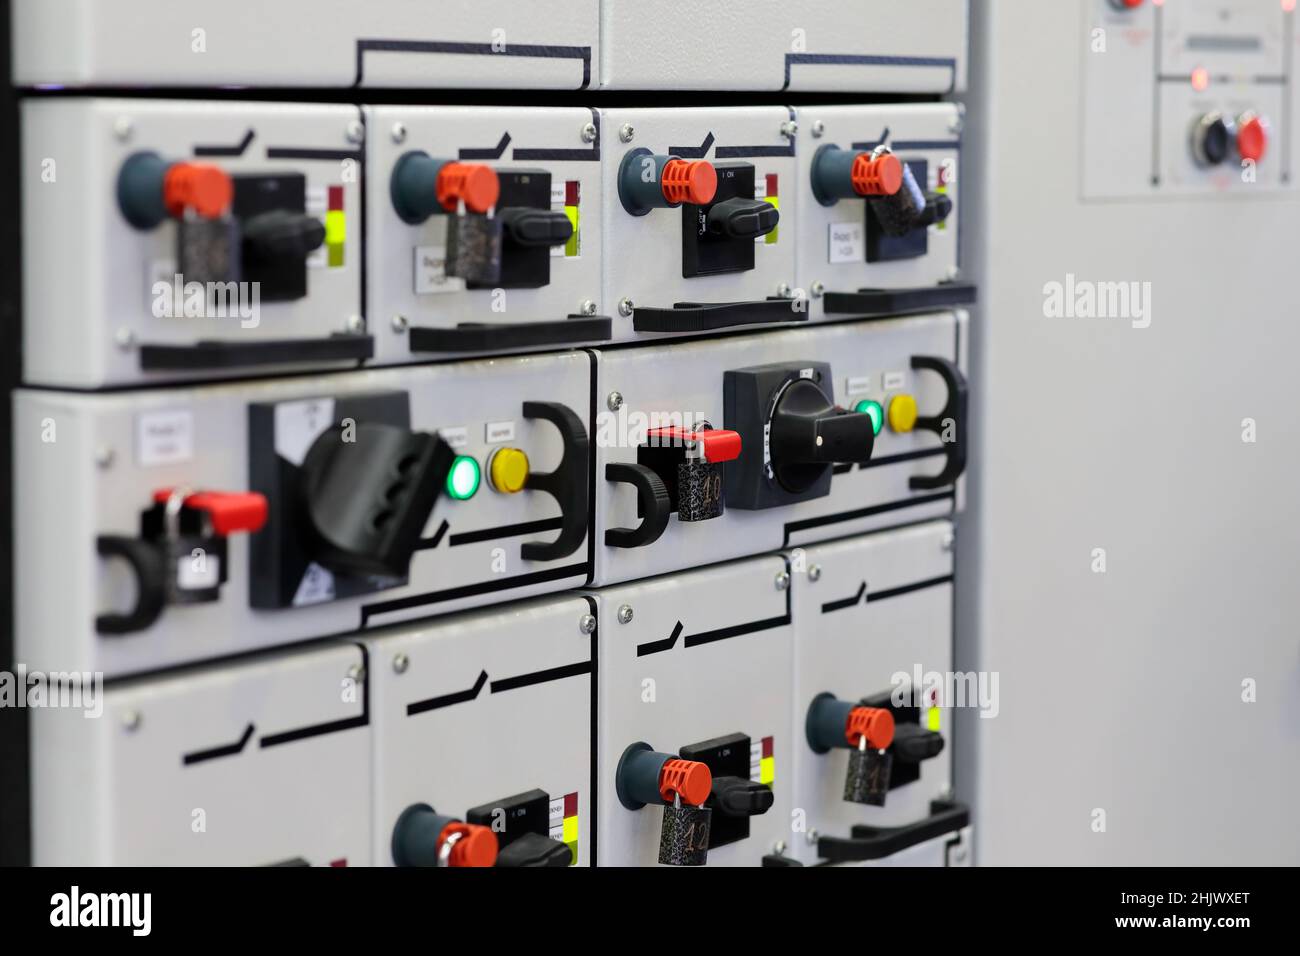 Industrial power distribution cabinet. Electrical distribution board. Circuit breaker panel. Selective focus. Stock Photo